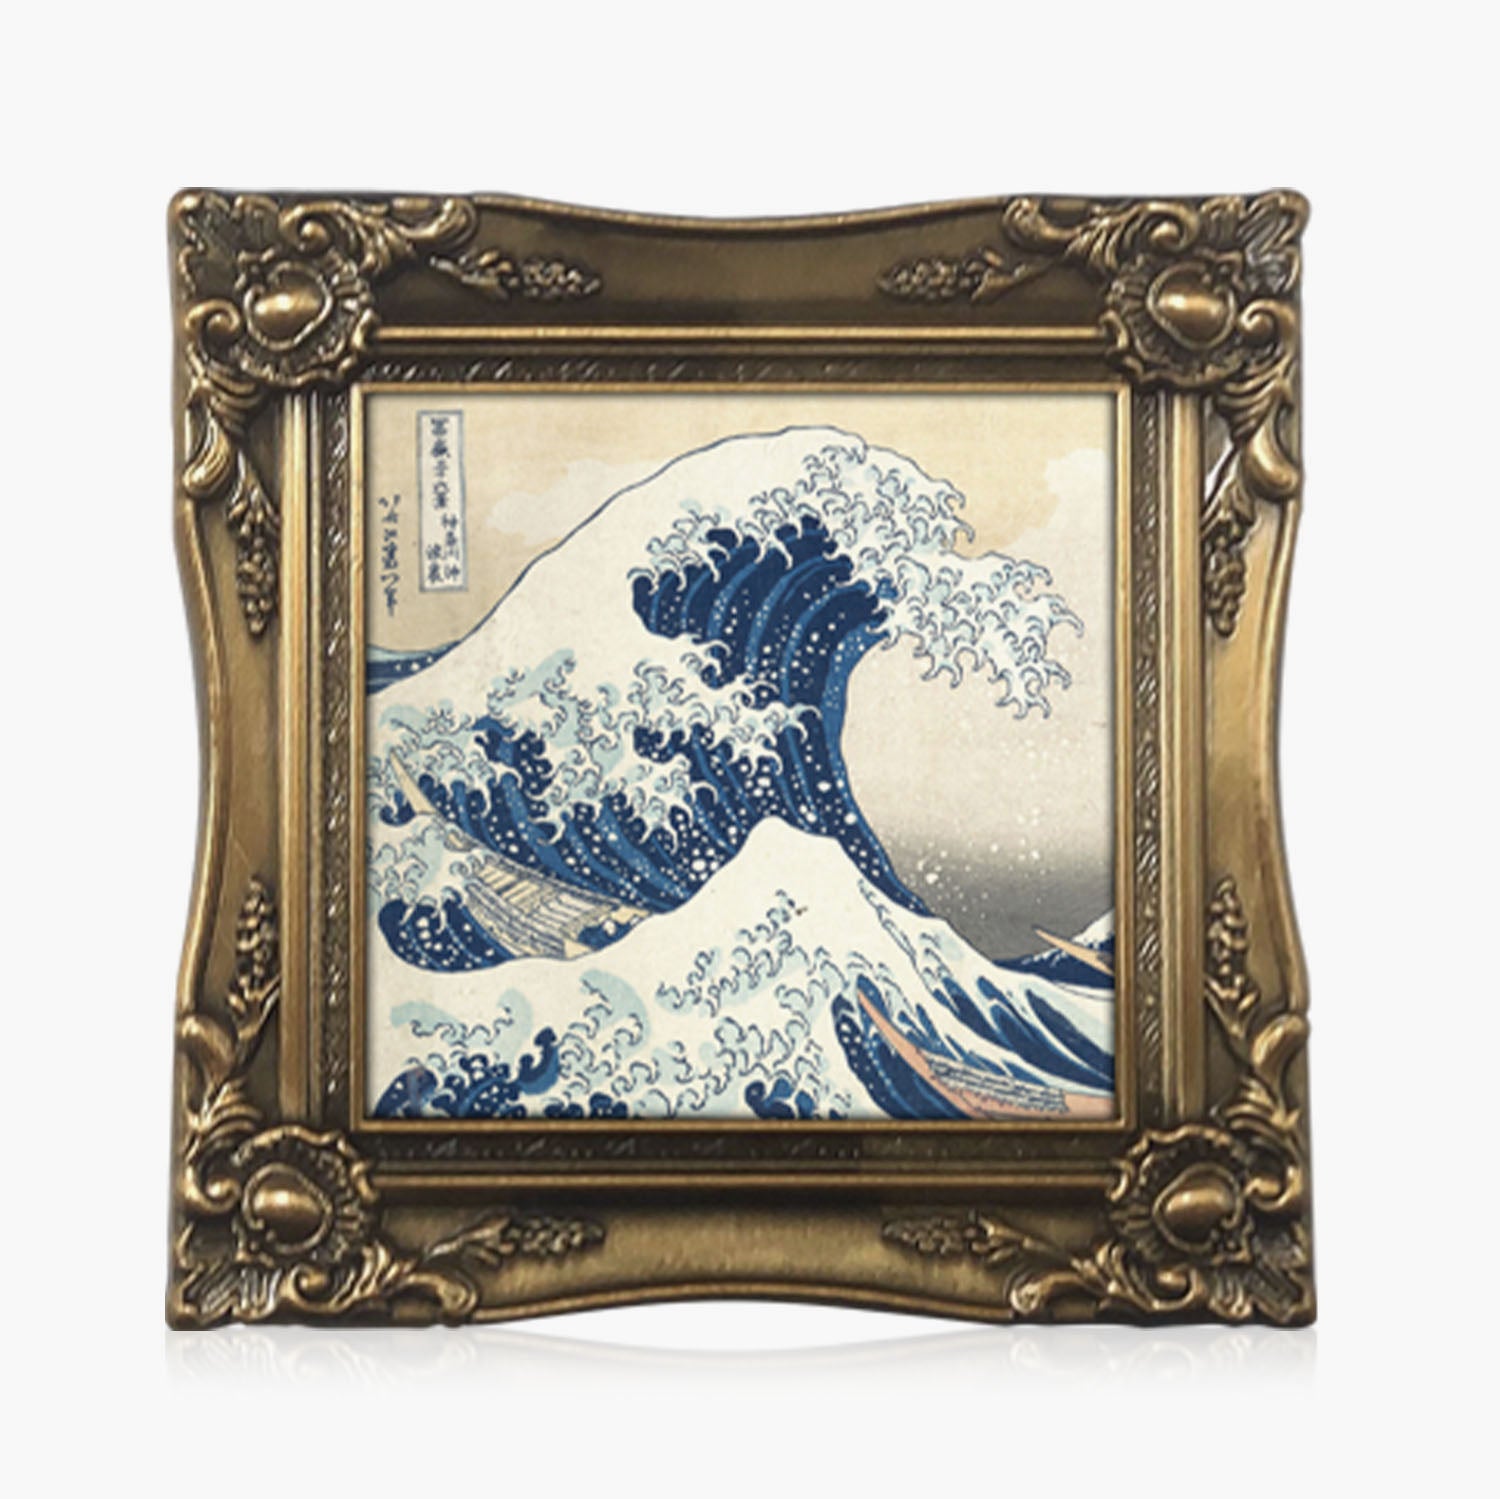 The Most Famous Paintings - Hokusai - The Great Wave off Kanagawa